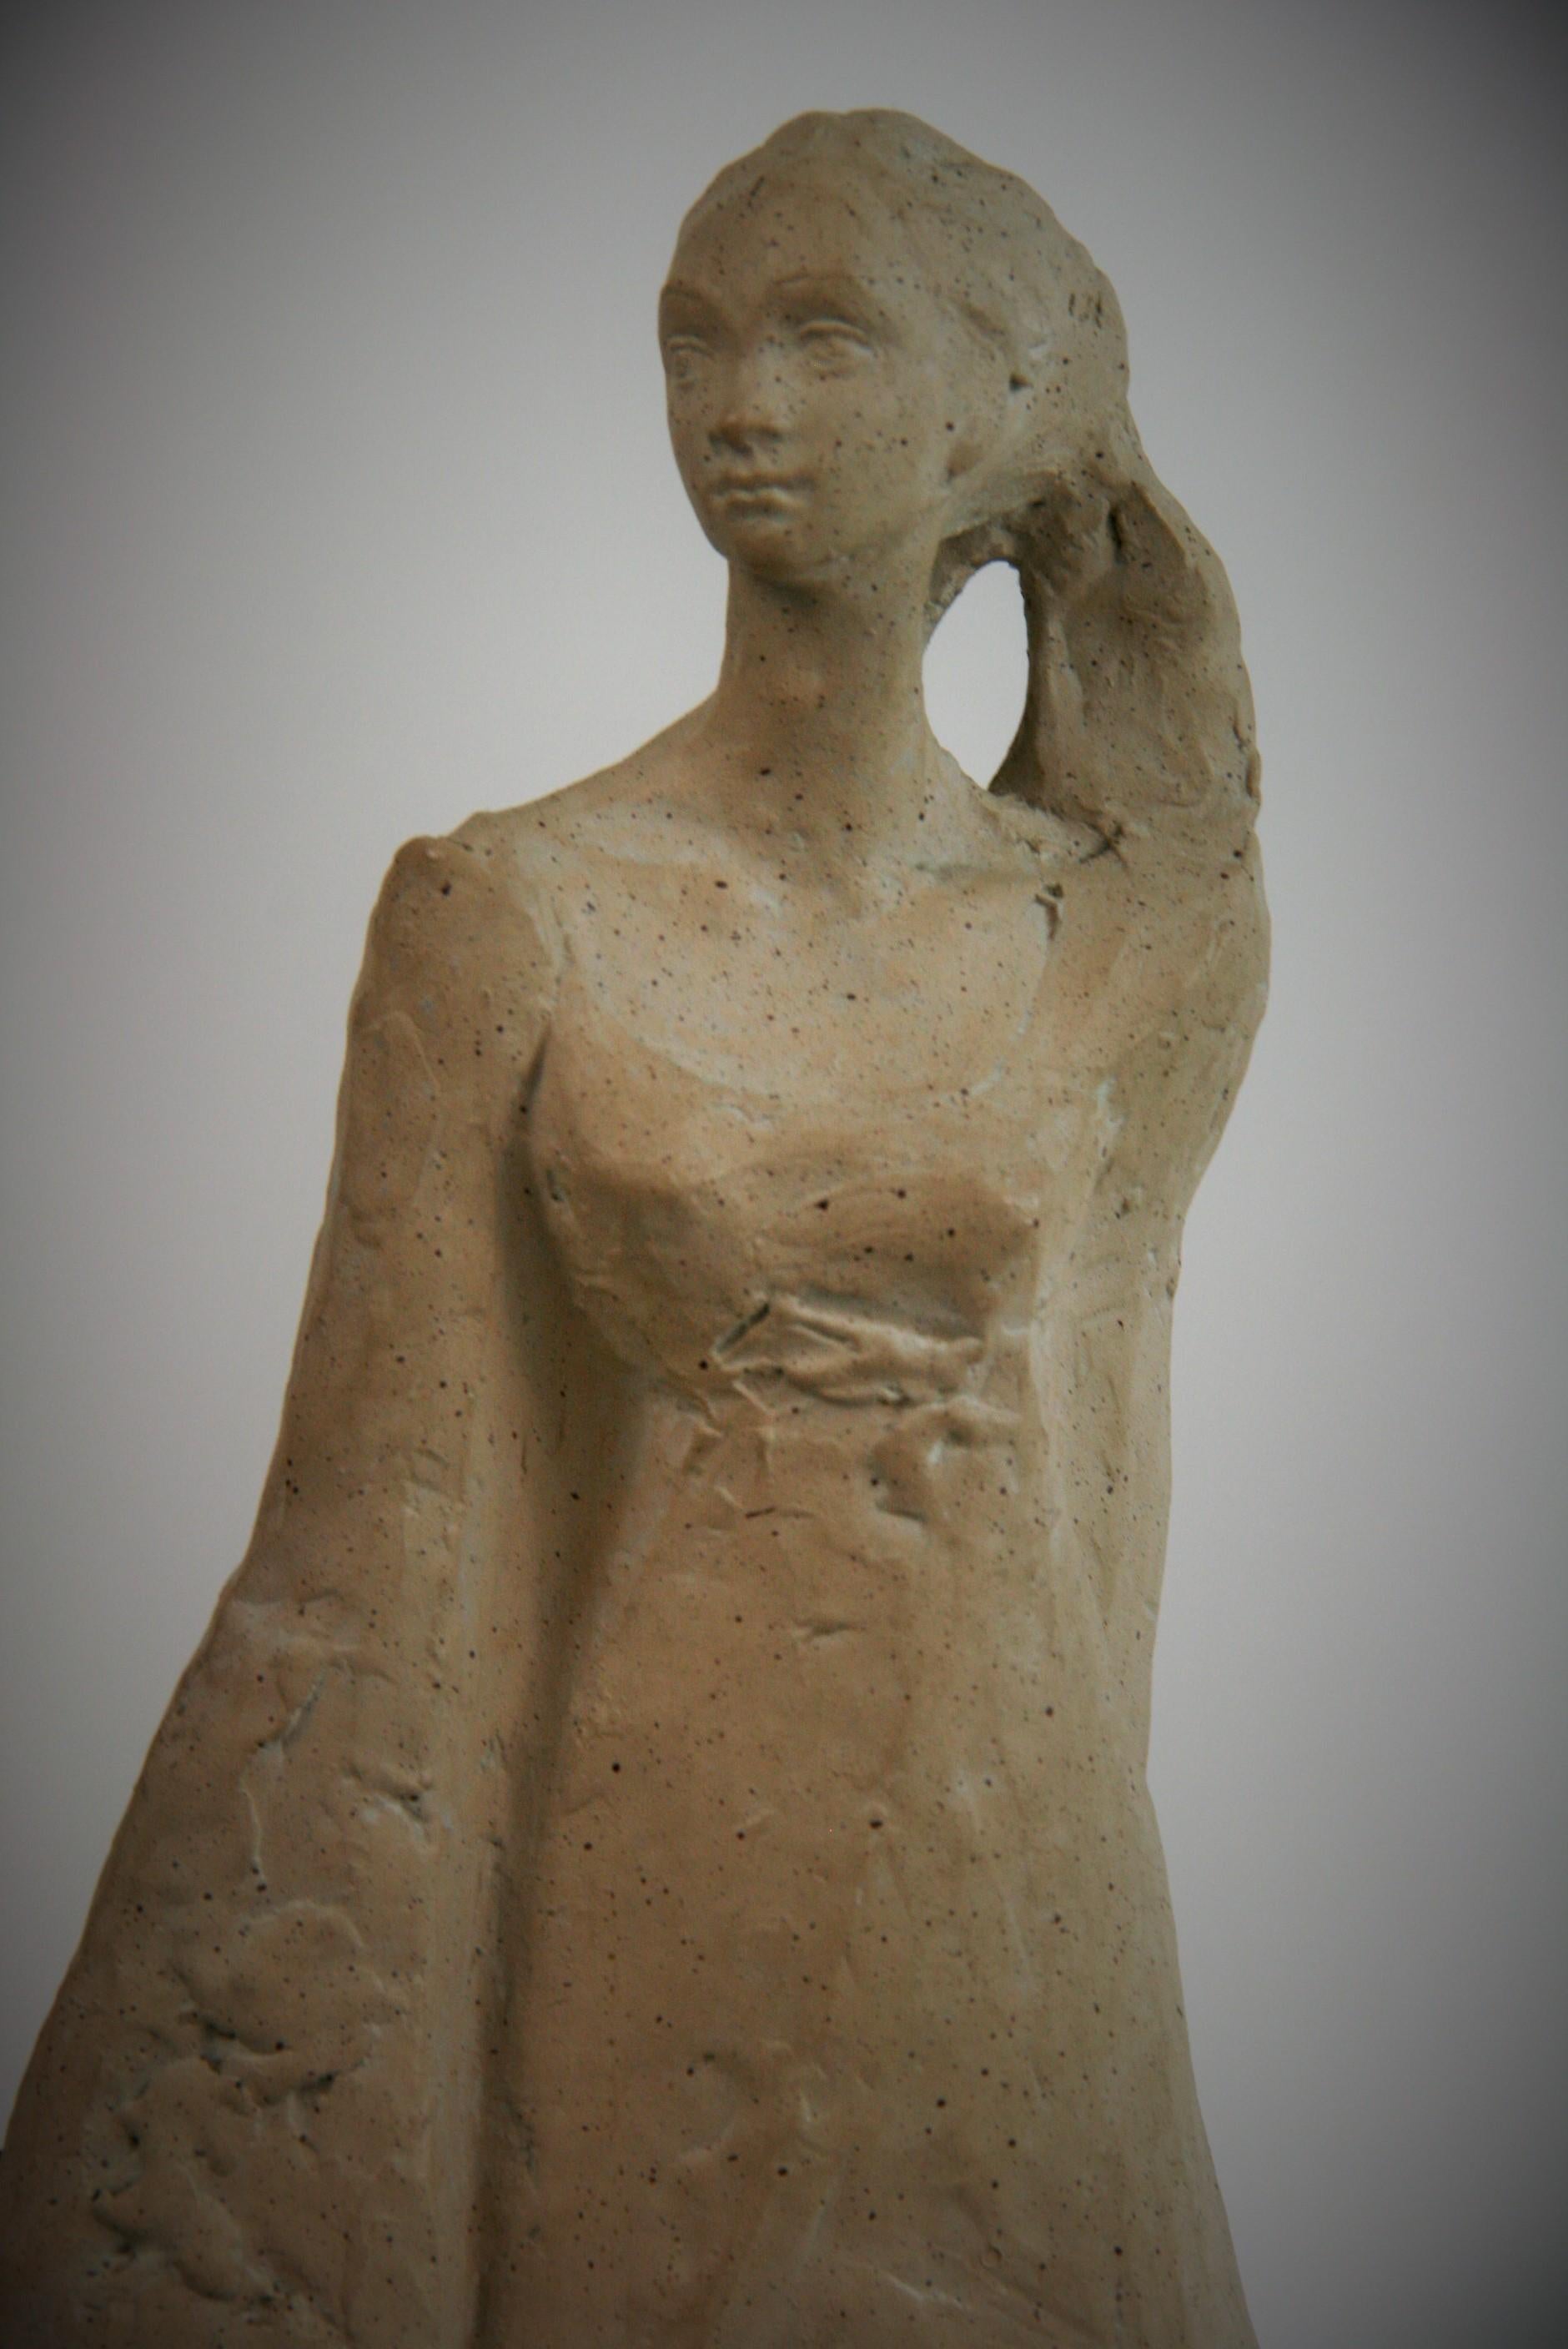 Mother with Children Cast Stone Sculpture  - Gray Figurative Sculpture by Austin Productions